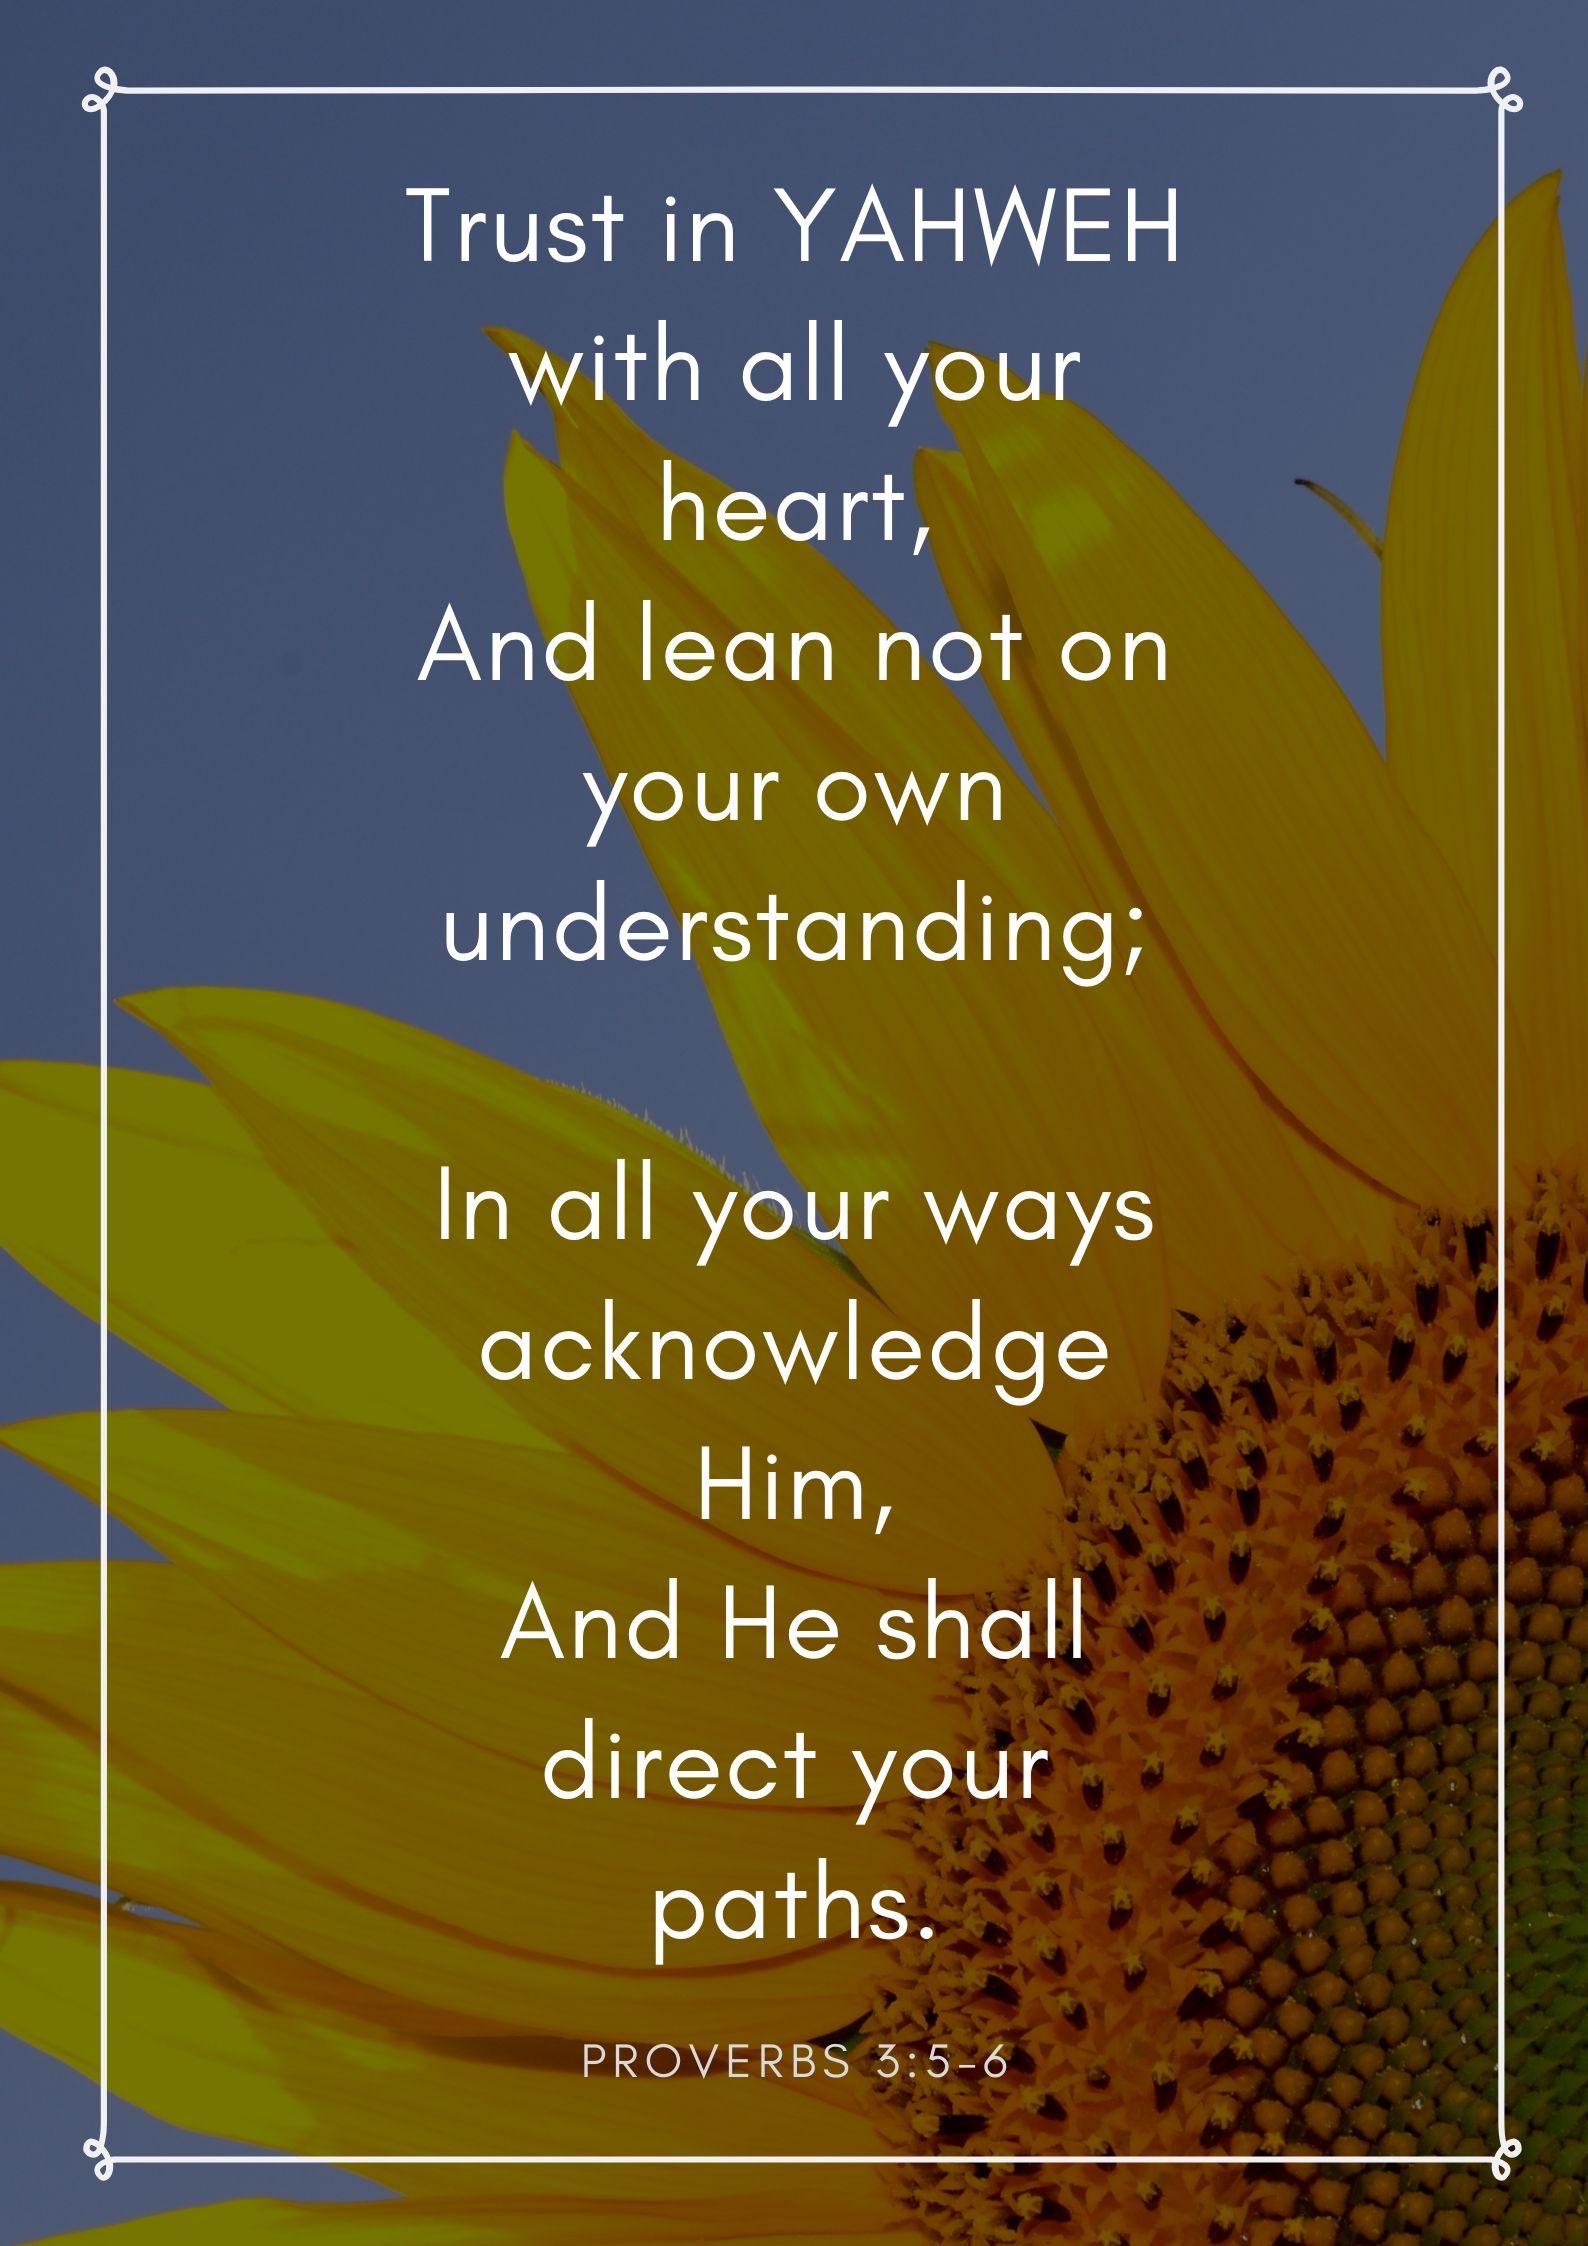 Trust in YAHWEH with all your heart, And lean not on your own understanding;  In all your ways acknowledge Him, And He shall direct your paths. Proverbs 3:5-6